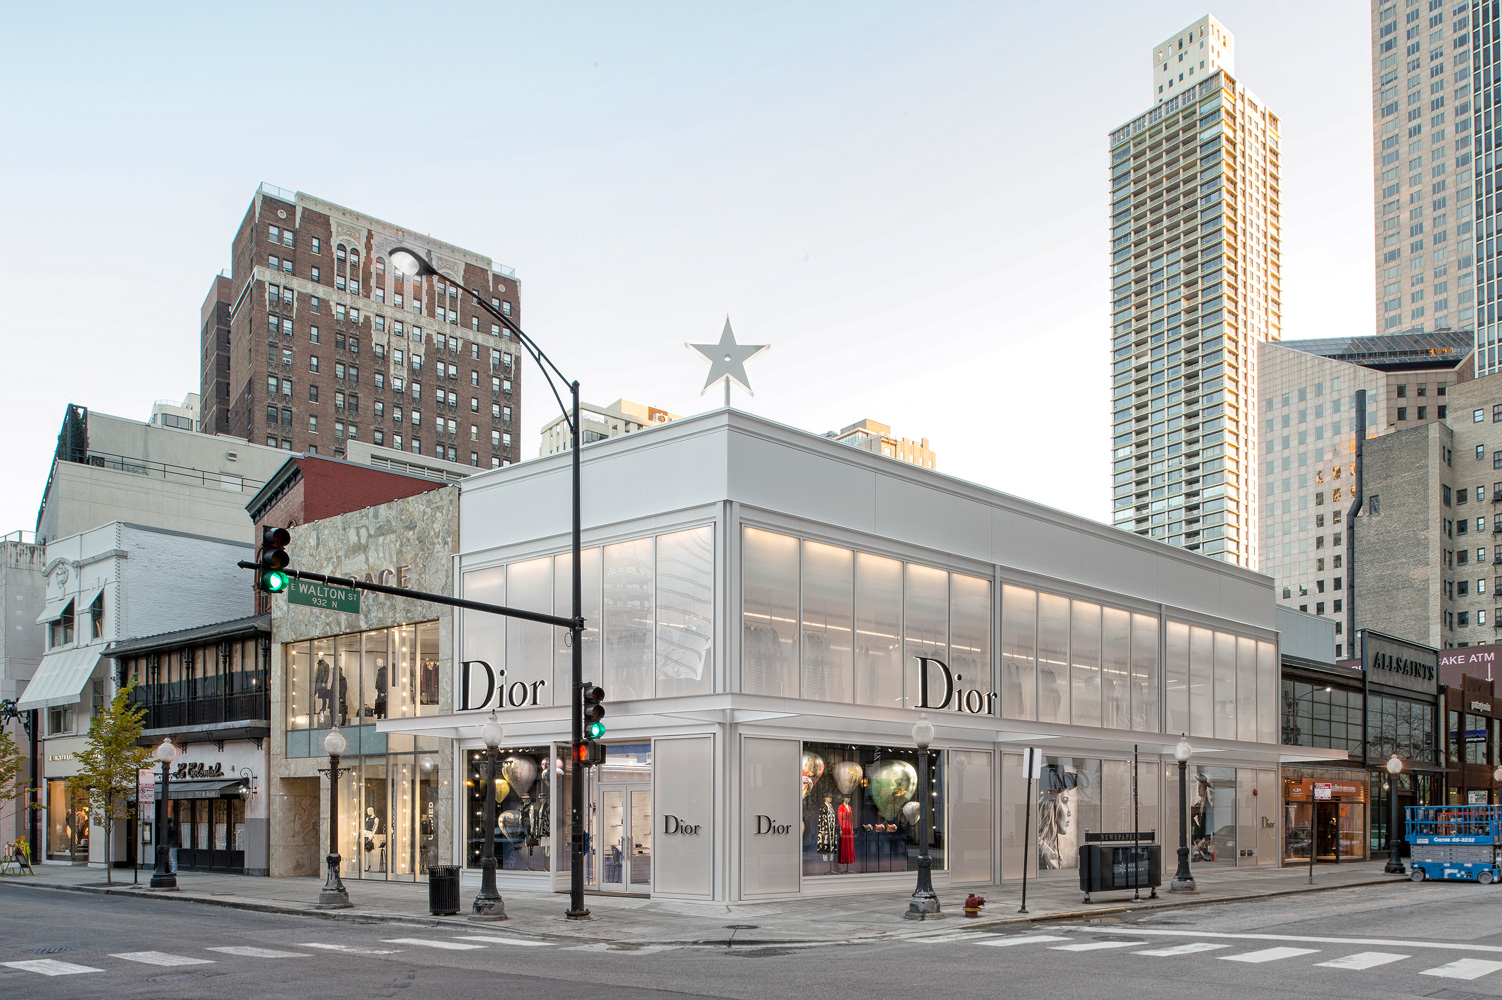 Exterior, street view of Dior flagship storefont in Chicago, AGNORA fabricated Insulated Glass Units up to 146" in length, laminated, tempered, and digitally-printed.